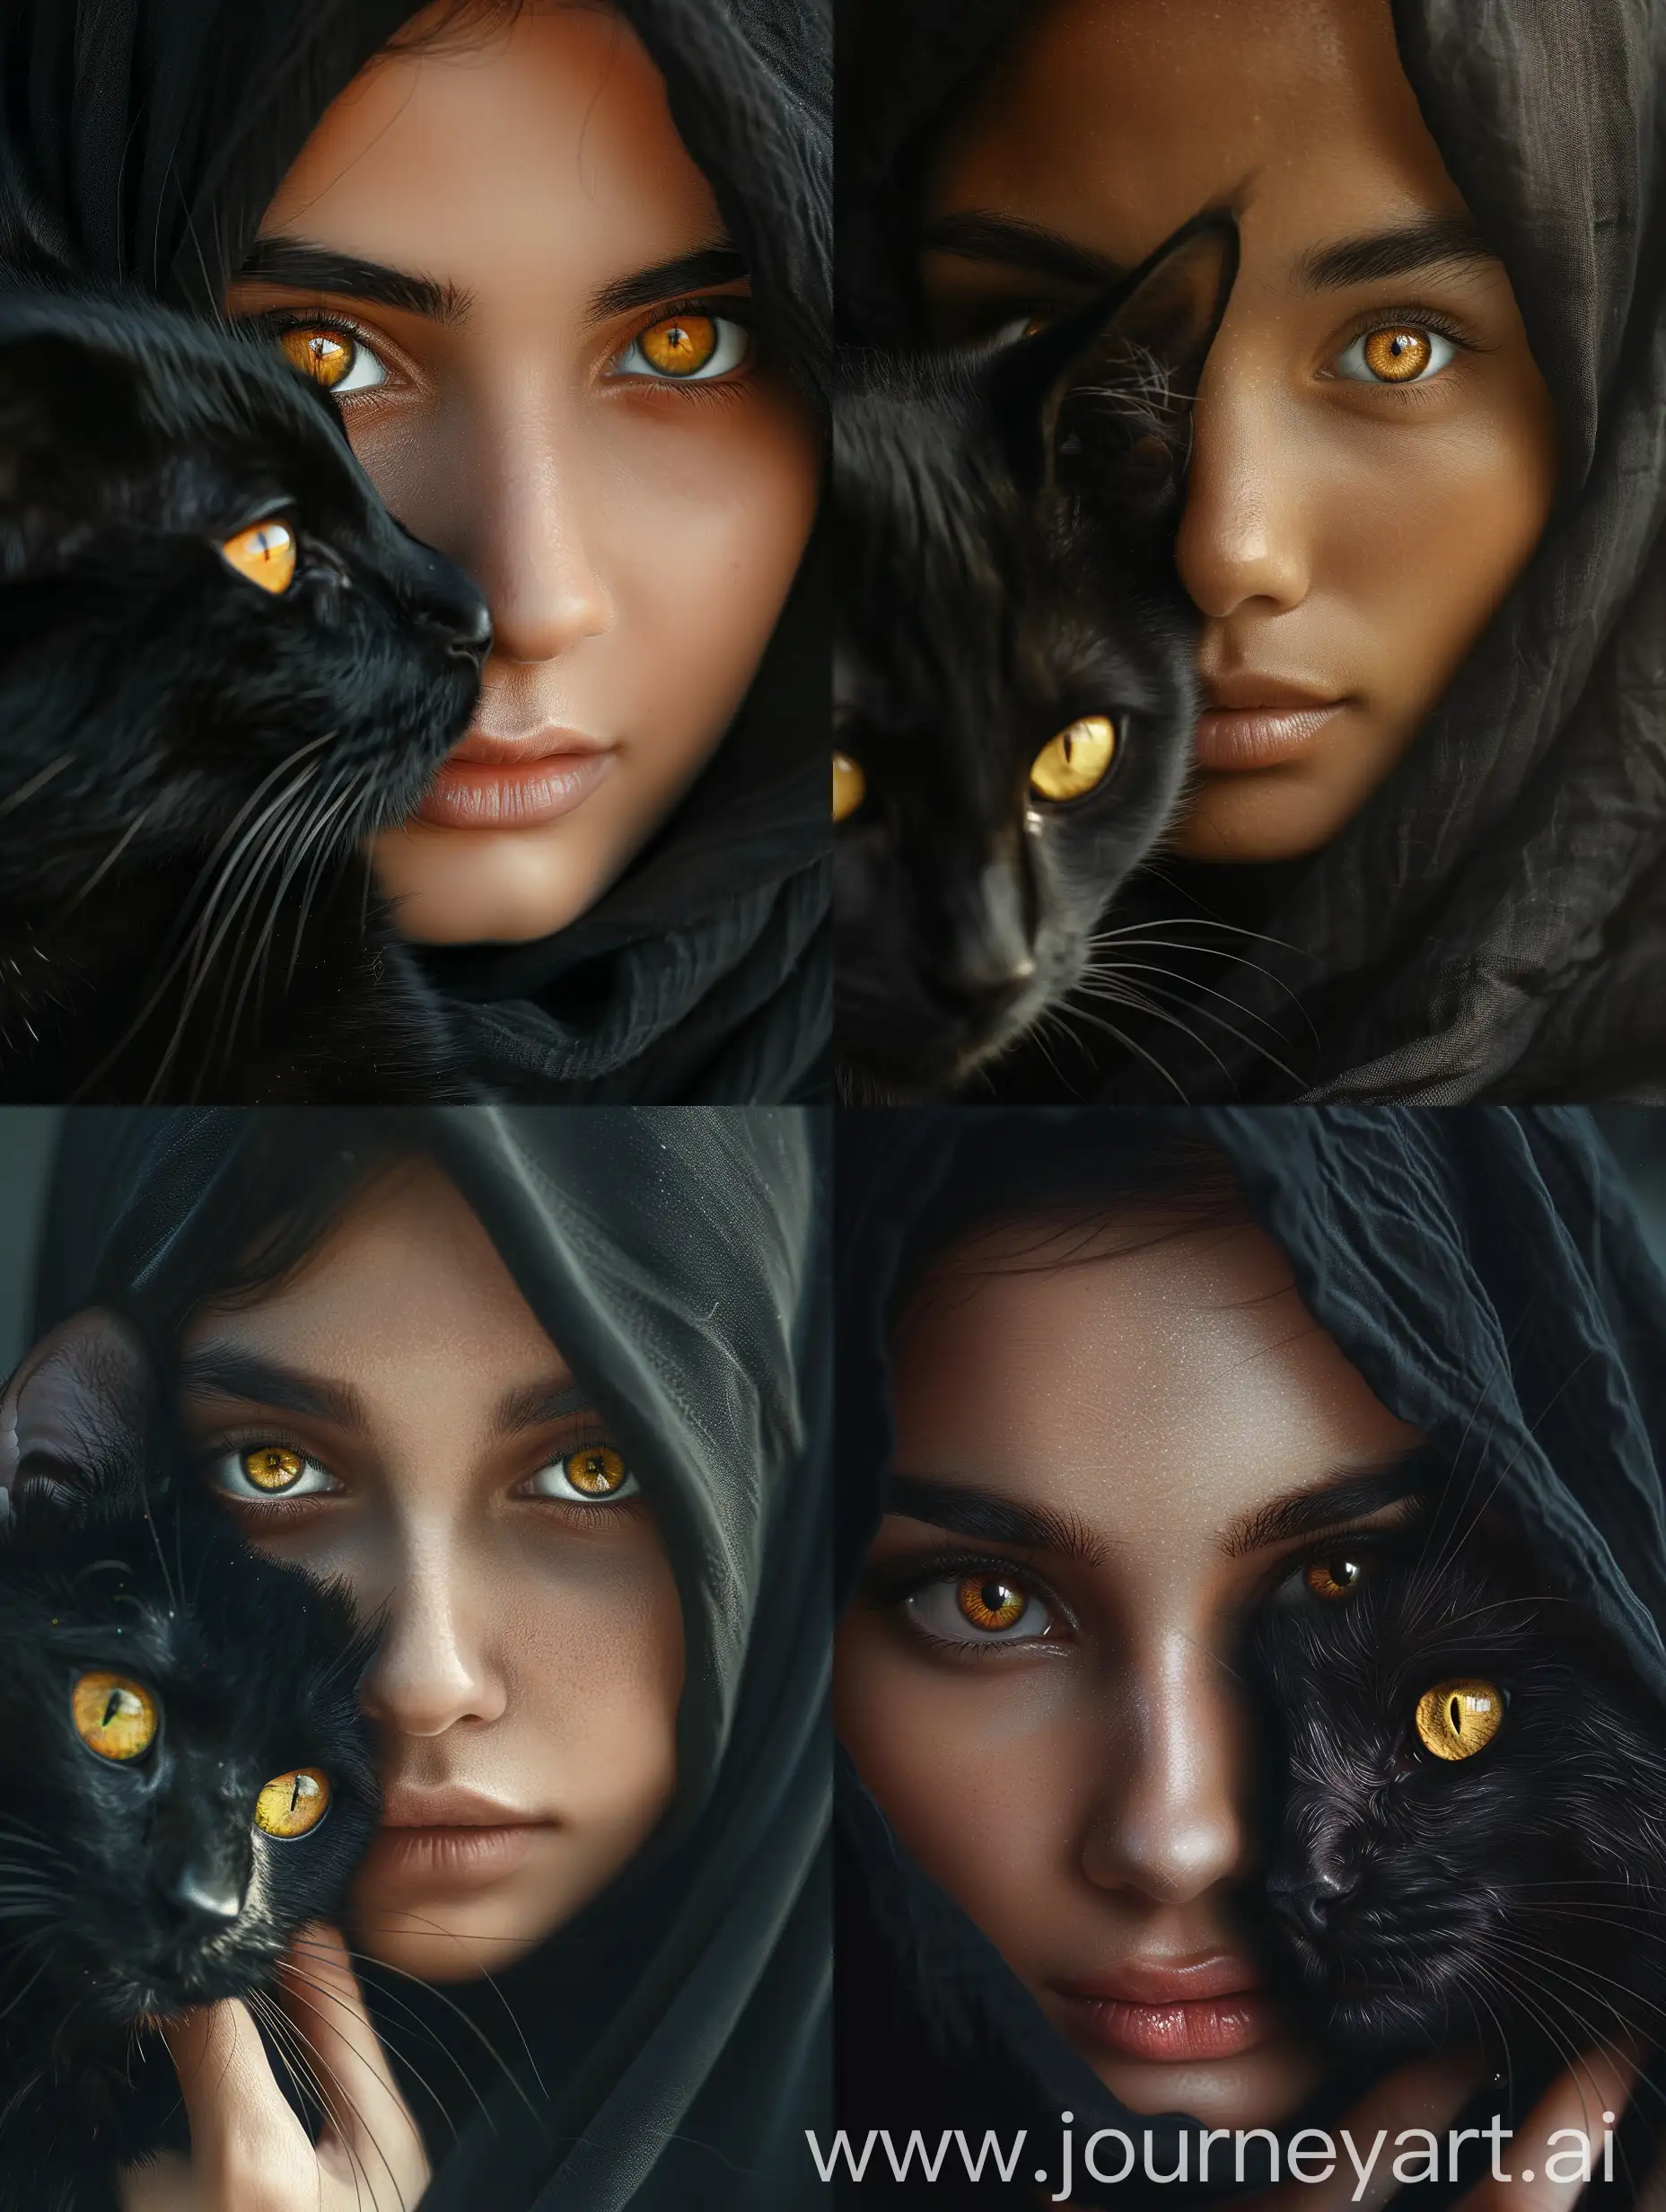 Close-up portrait of a young woman hijab beautiful with a black bob haircut, holding a black cat in front of her face, both having striking yellow eyes, intimate and mysterious atmosphere, inspired by contemporary portrait photography, soft lighting, detailed textures, realistic shading, capturing the bond between the woman and her cat, emphasizing the contrast between their dark features and the bright eyes, highly detailed, realistic skin and fur textures